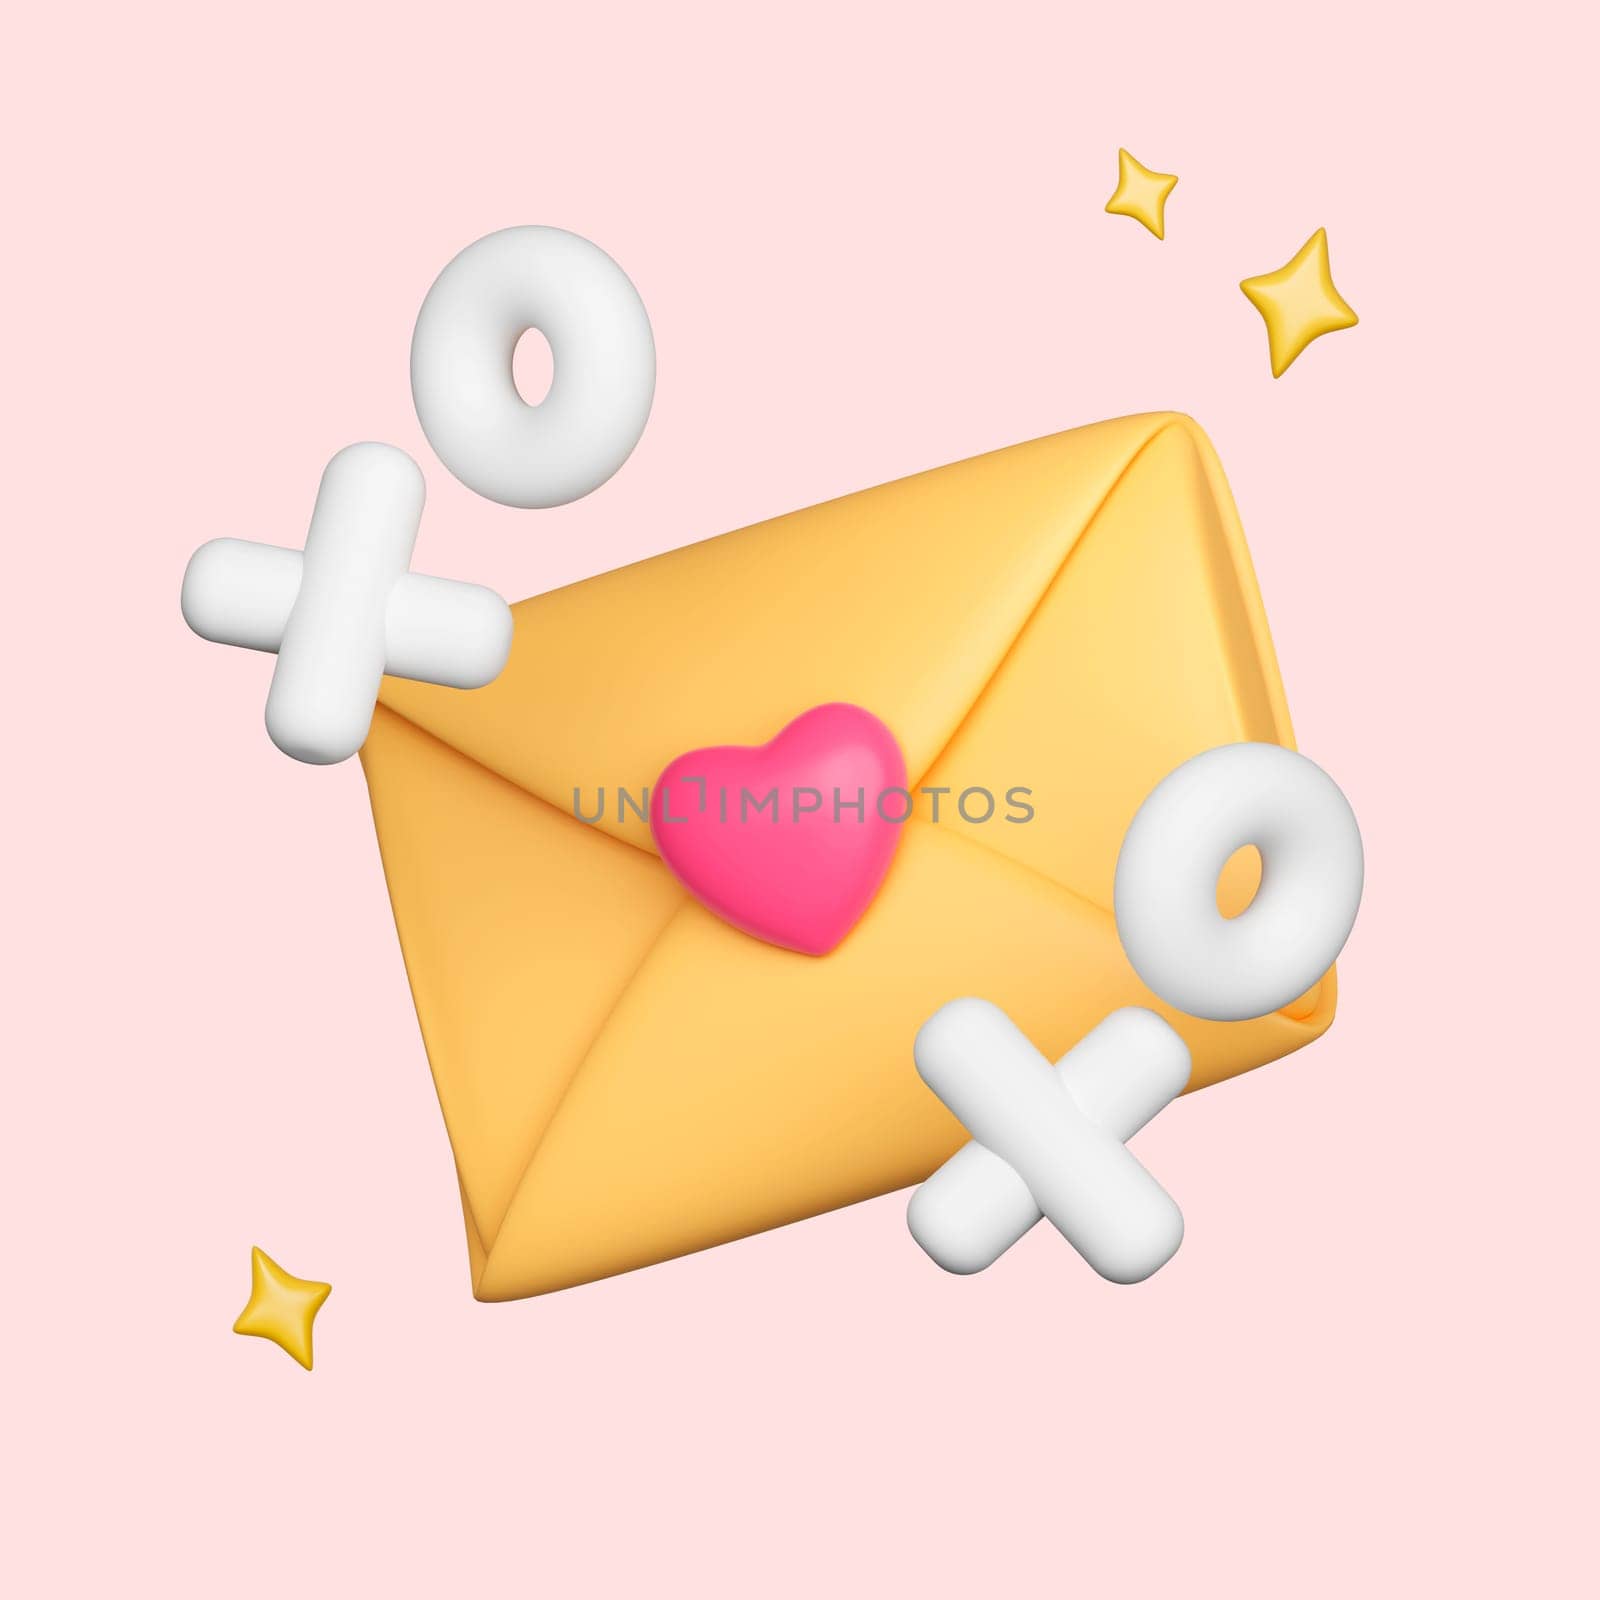 Envelope letter, mail letter with heart romantic design isolated on pink background. clipping path. 3D render illustration by meepiangraphic